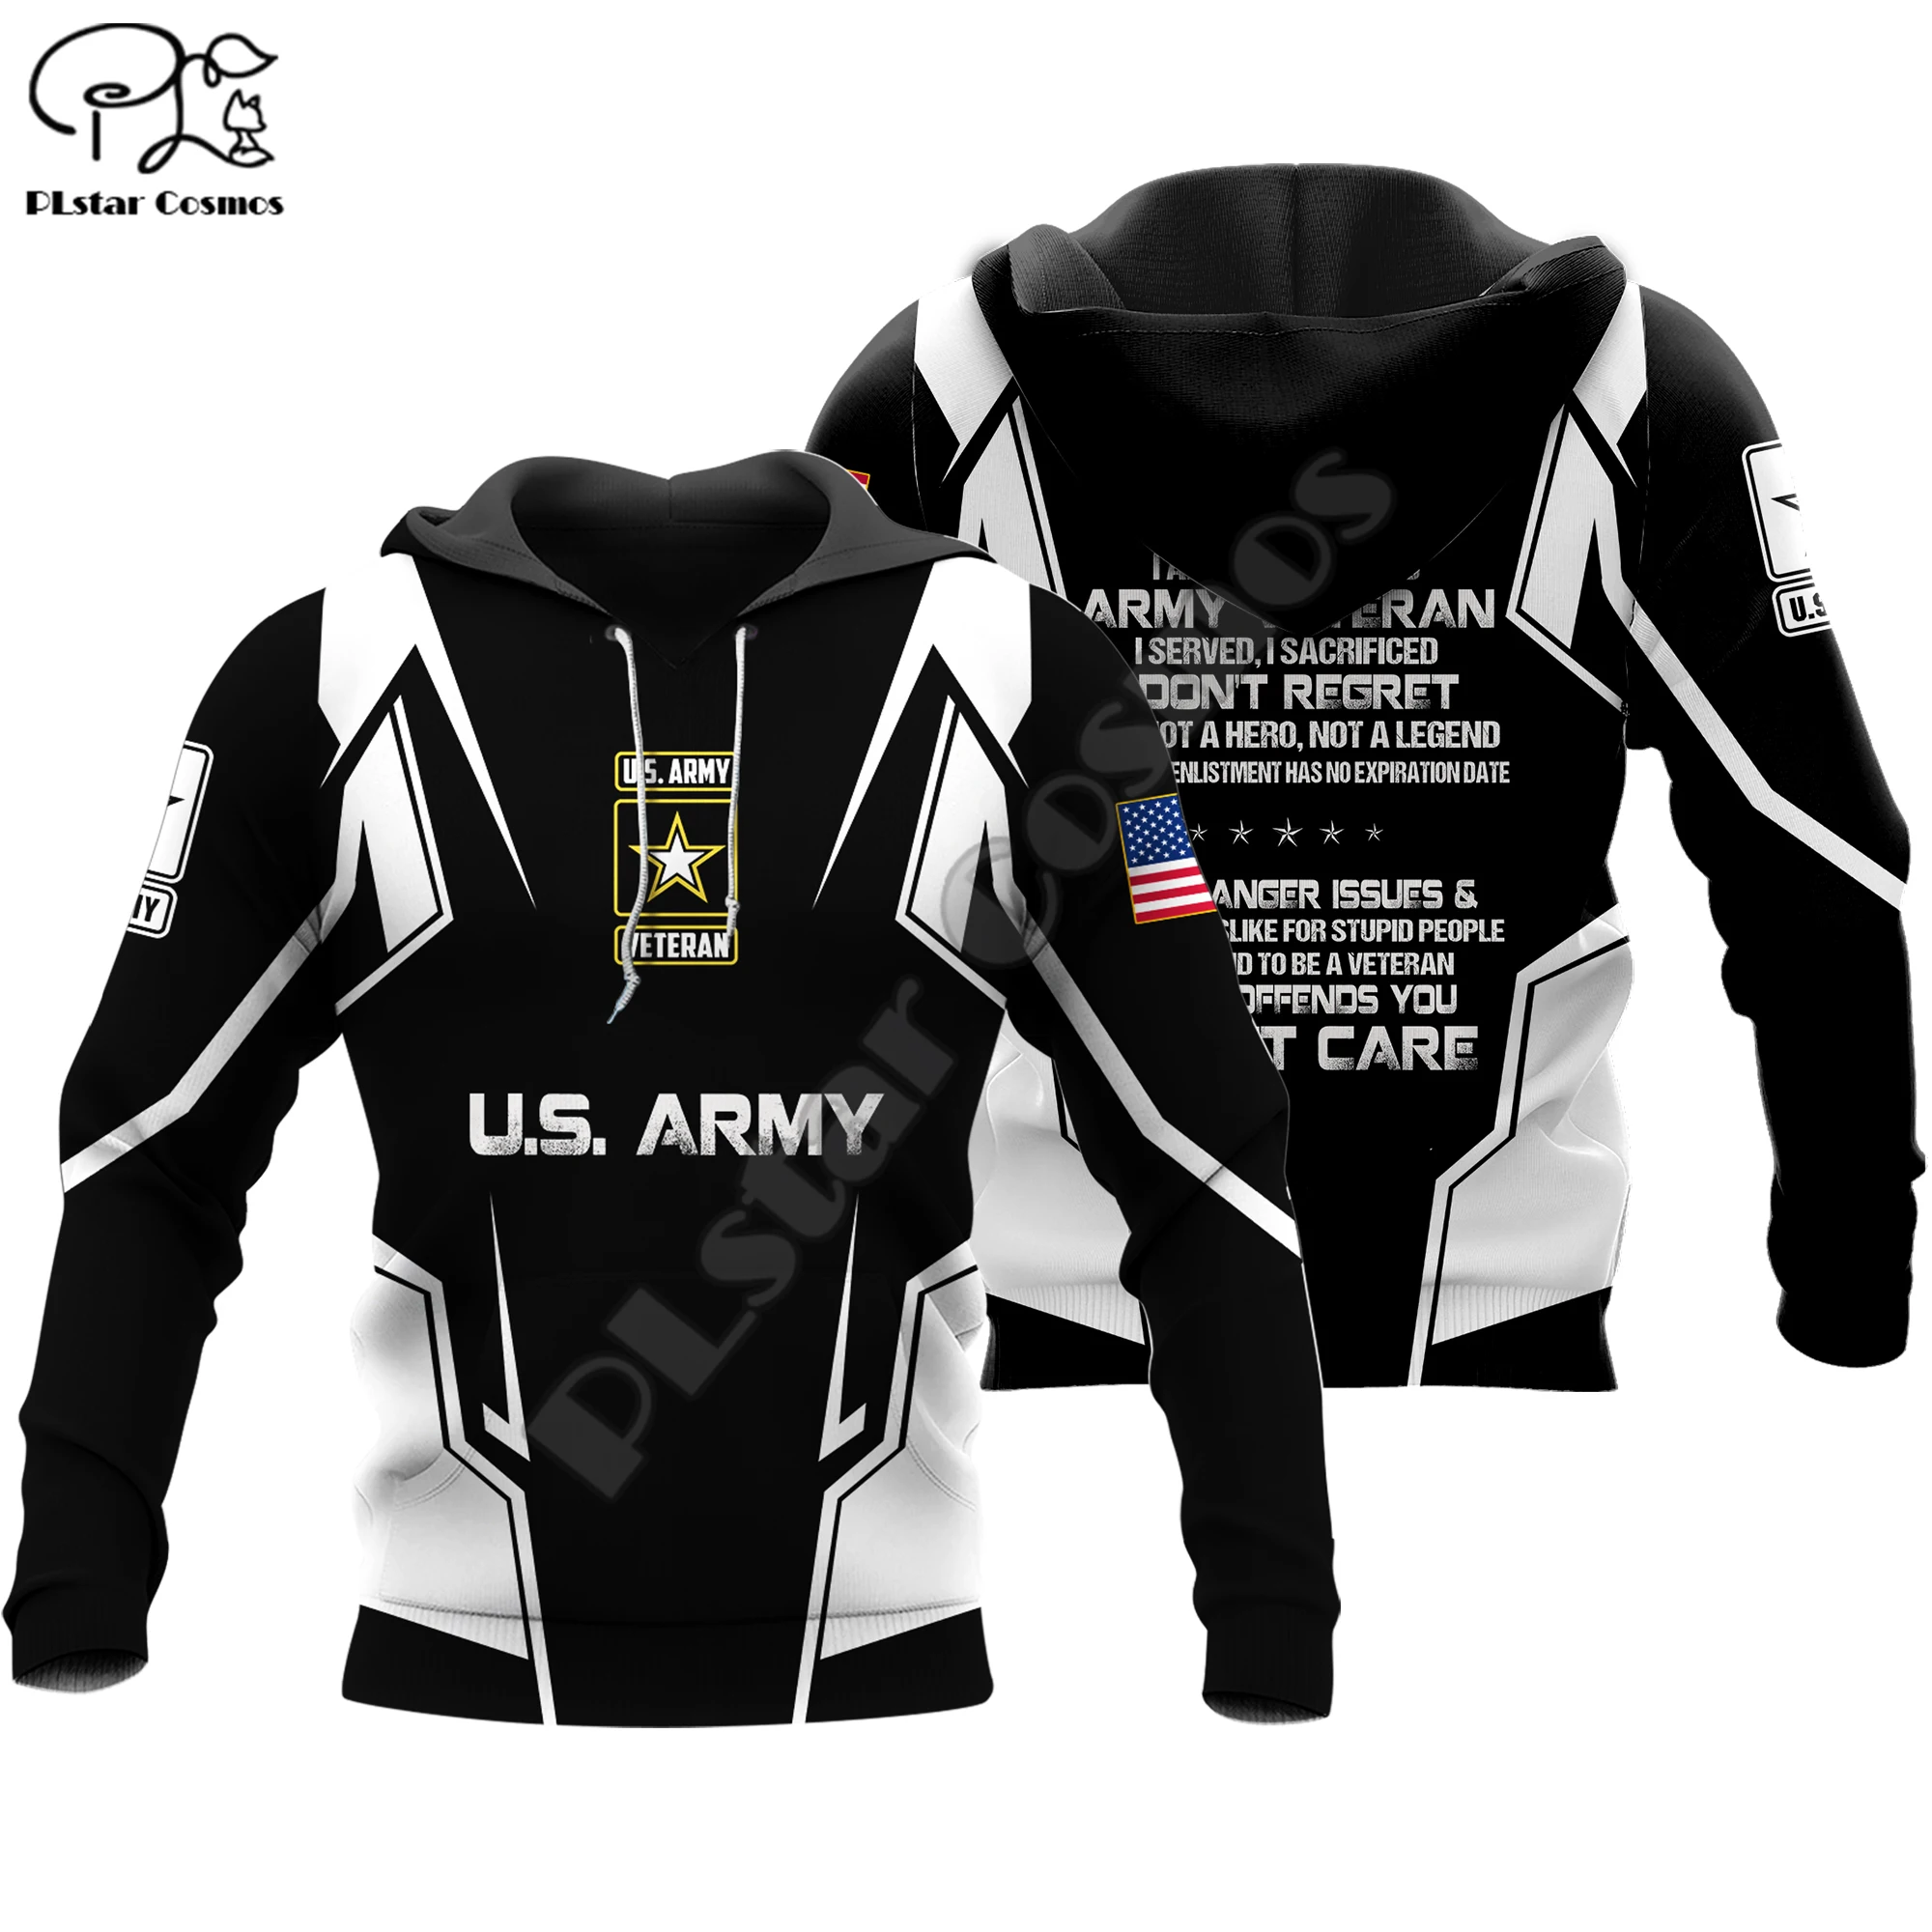 PLstar Cosmos Marine US Military Army suit Soldier Camo Pullover NewFashion Tracksuit 3DPrint Zip/Hoodies/Sweatshirts/Jacket A21